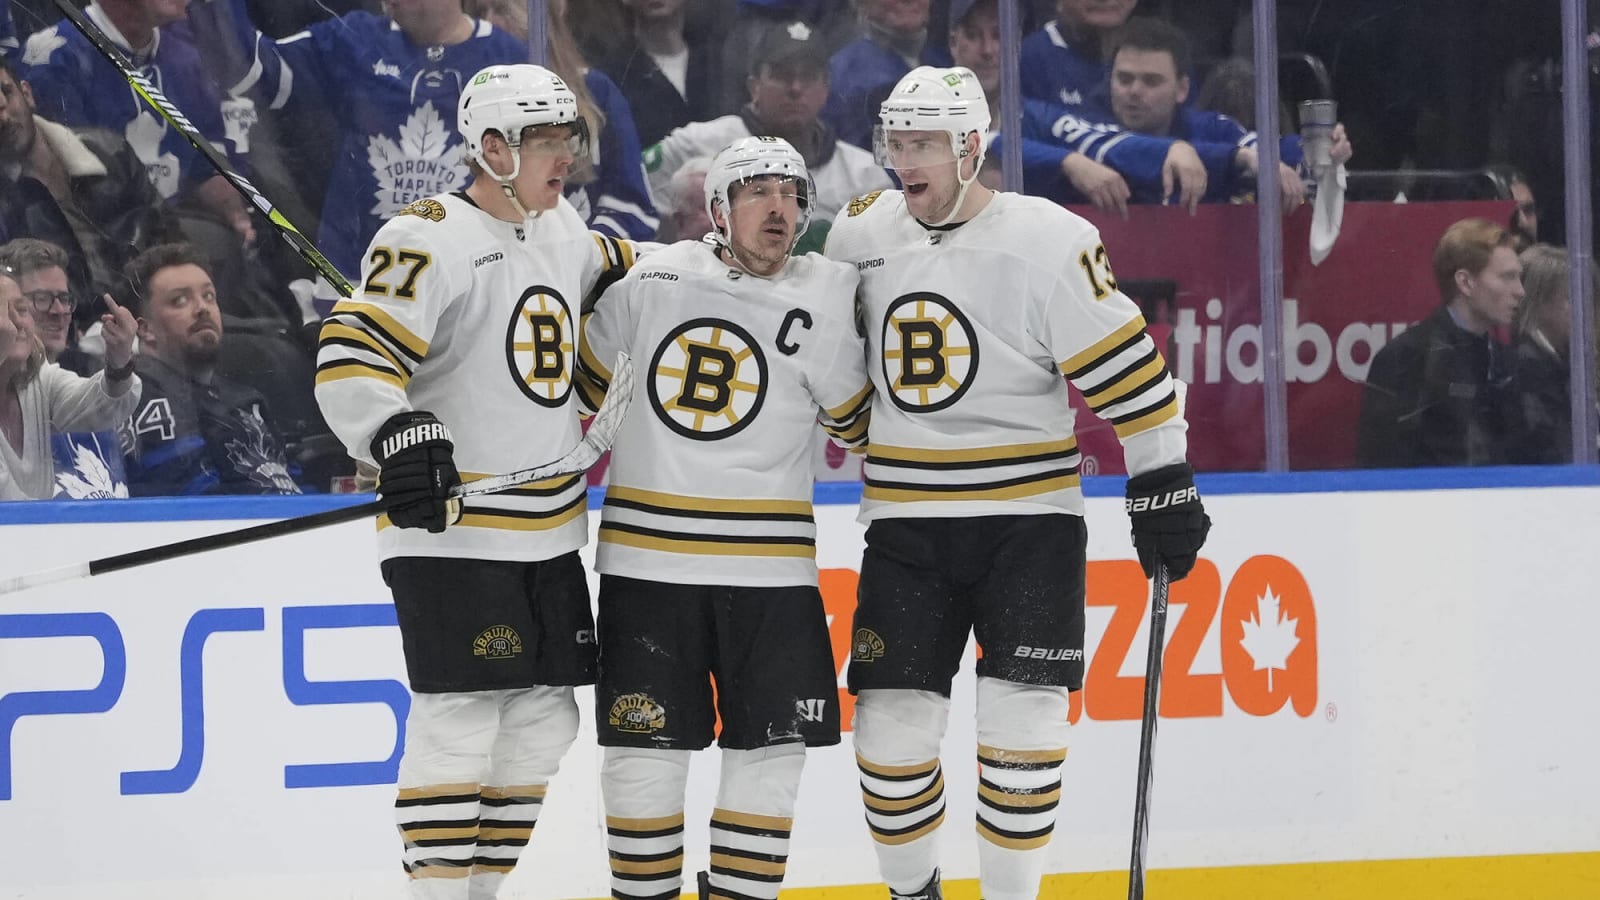 Bruins Take Game 3, Grab Home Ice Back From the Maple Leafs